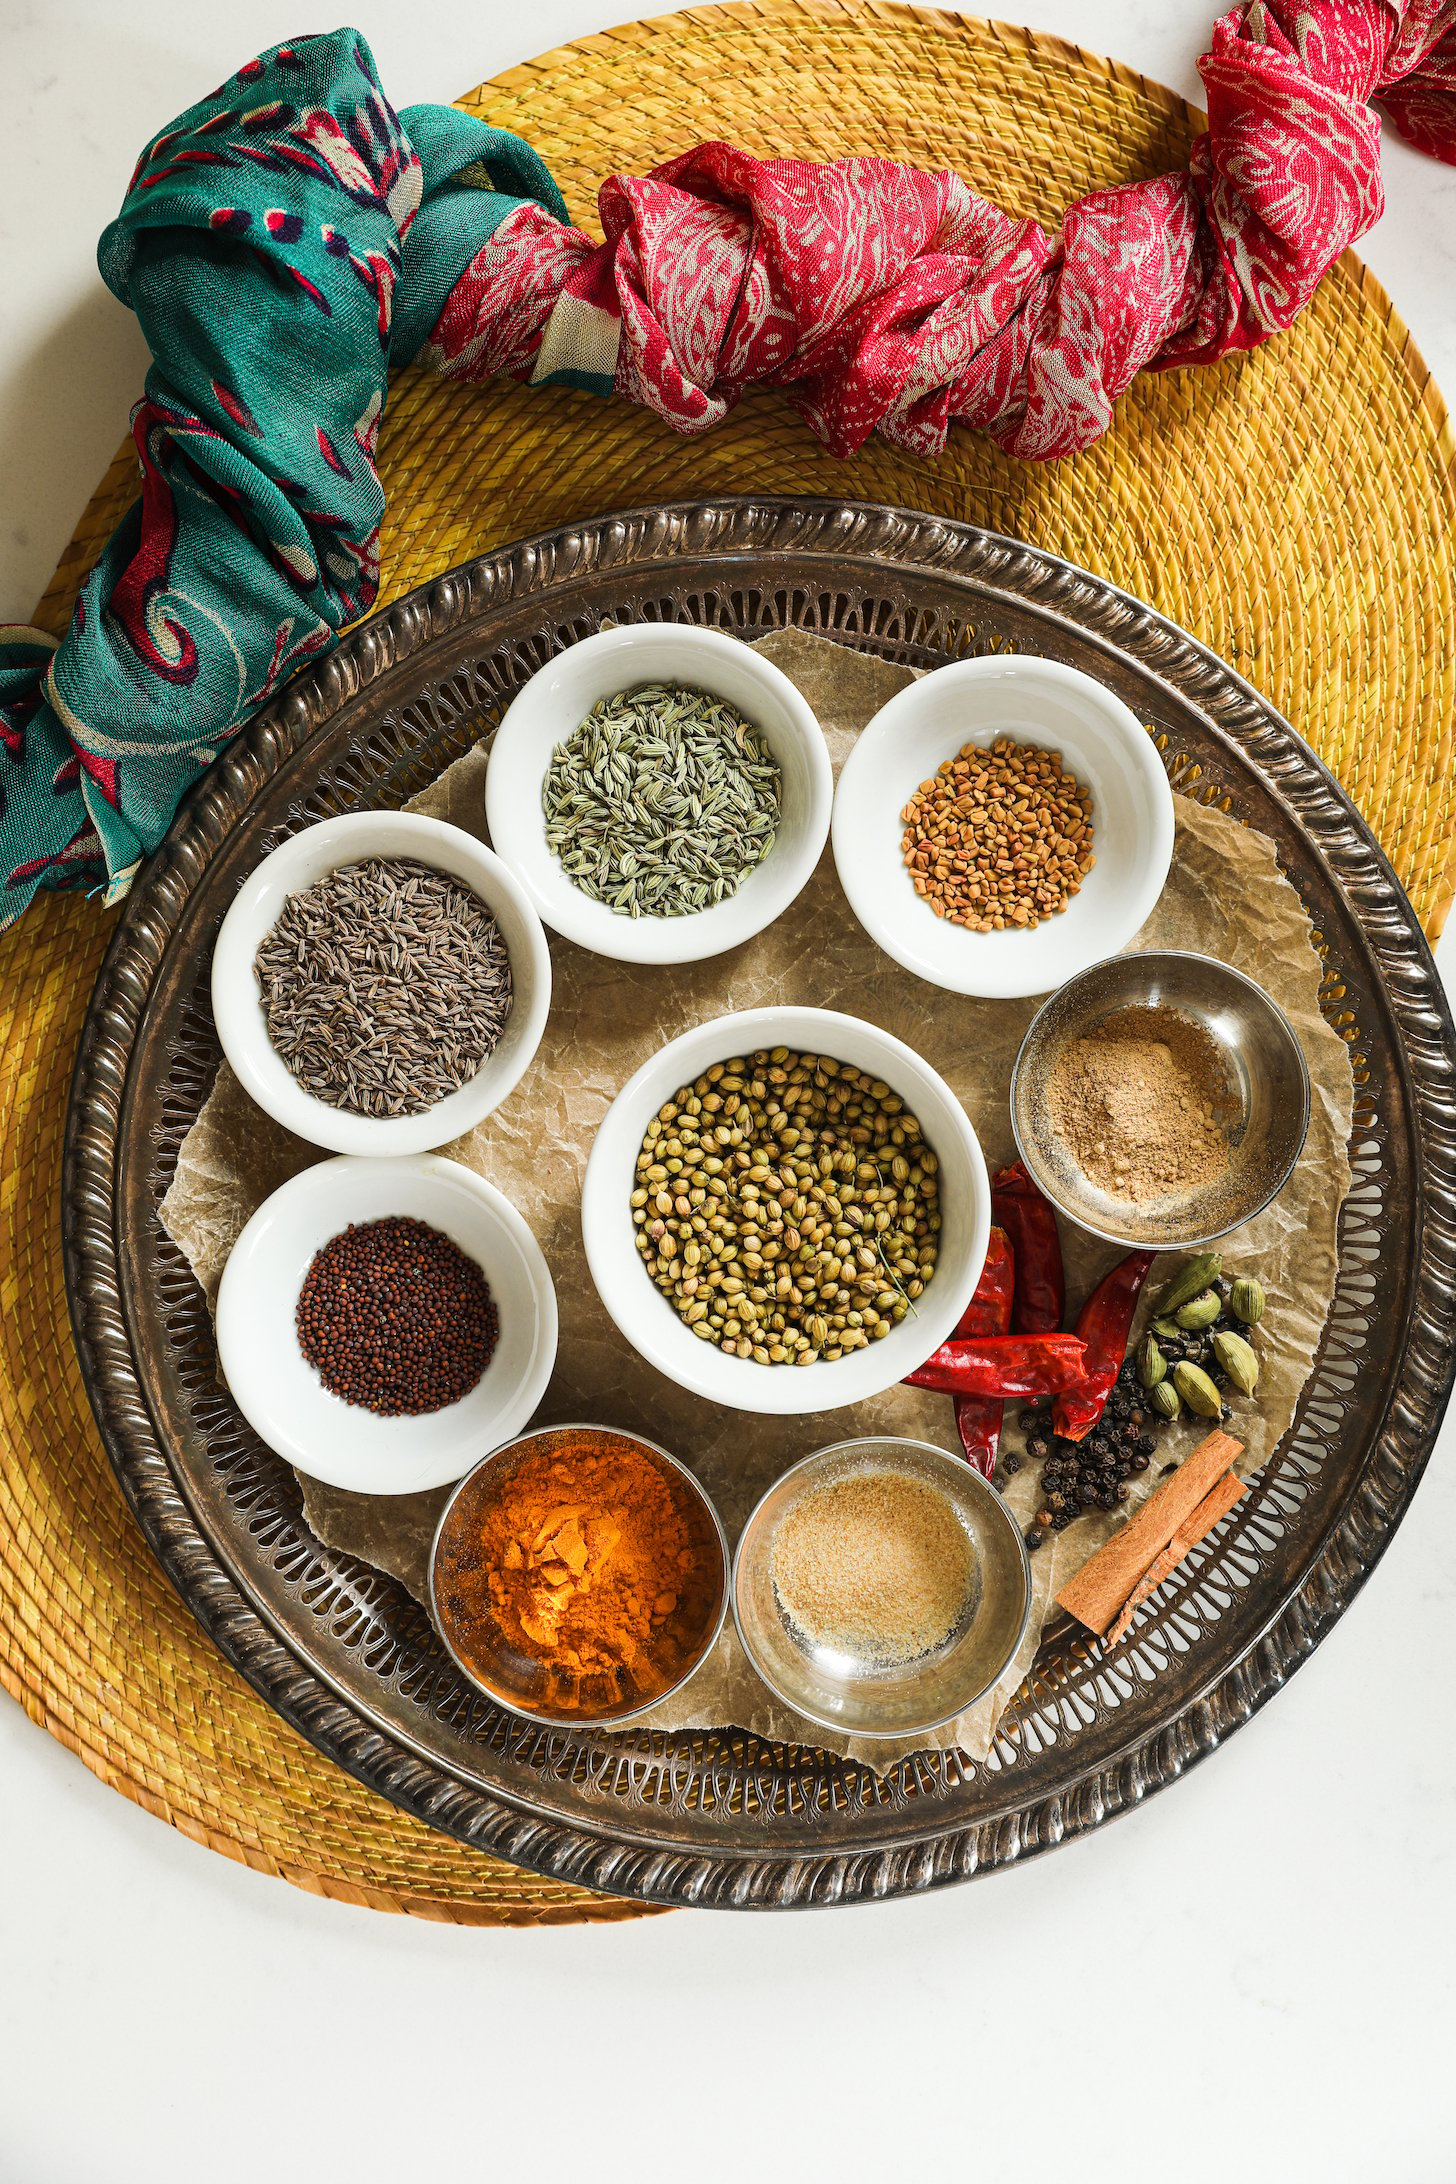 A collection of whole South Asian whole spices arranged beautifully in a a traditional round tray with a scarf on one side.